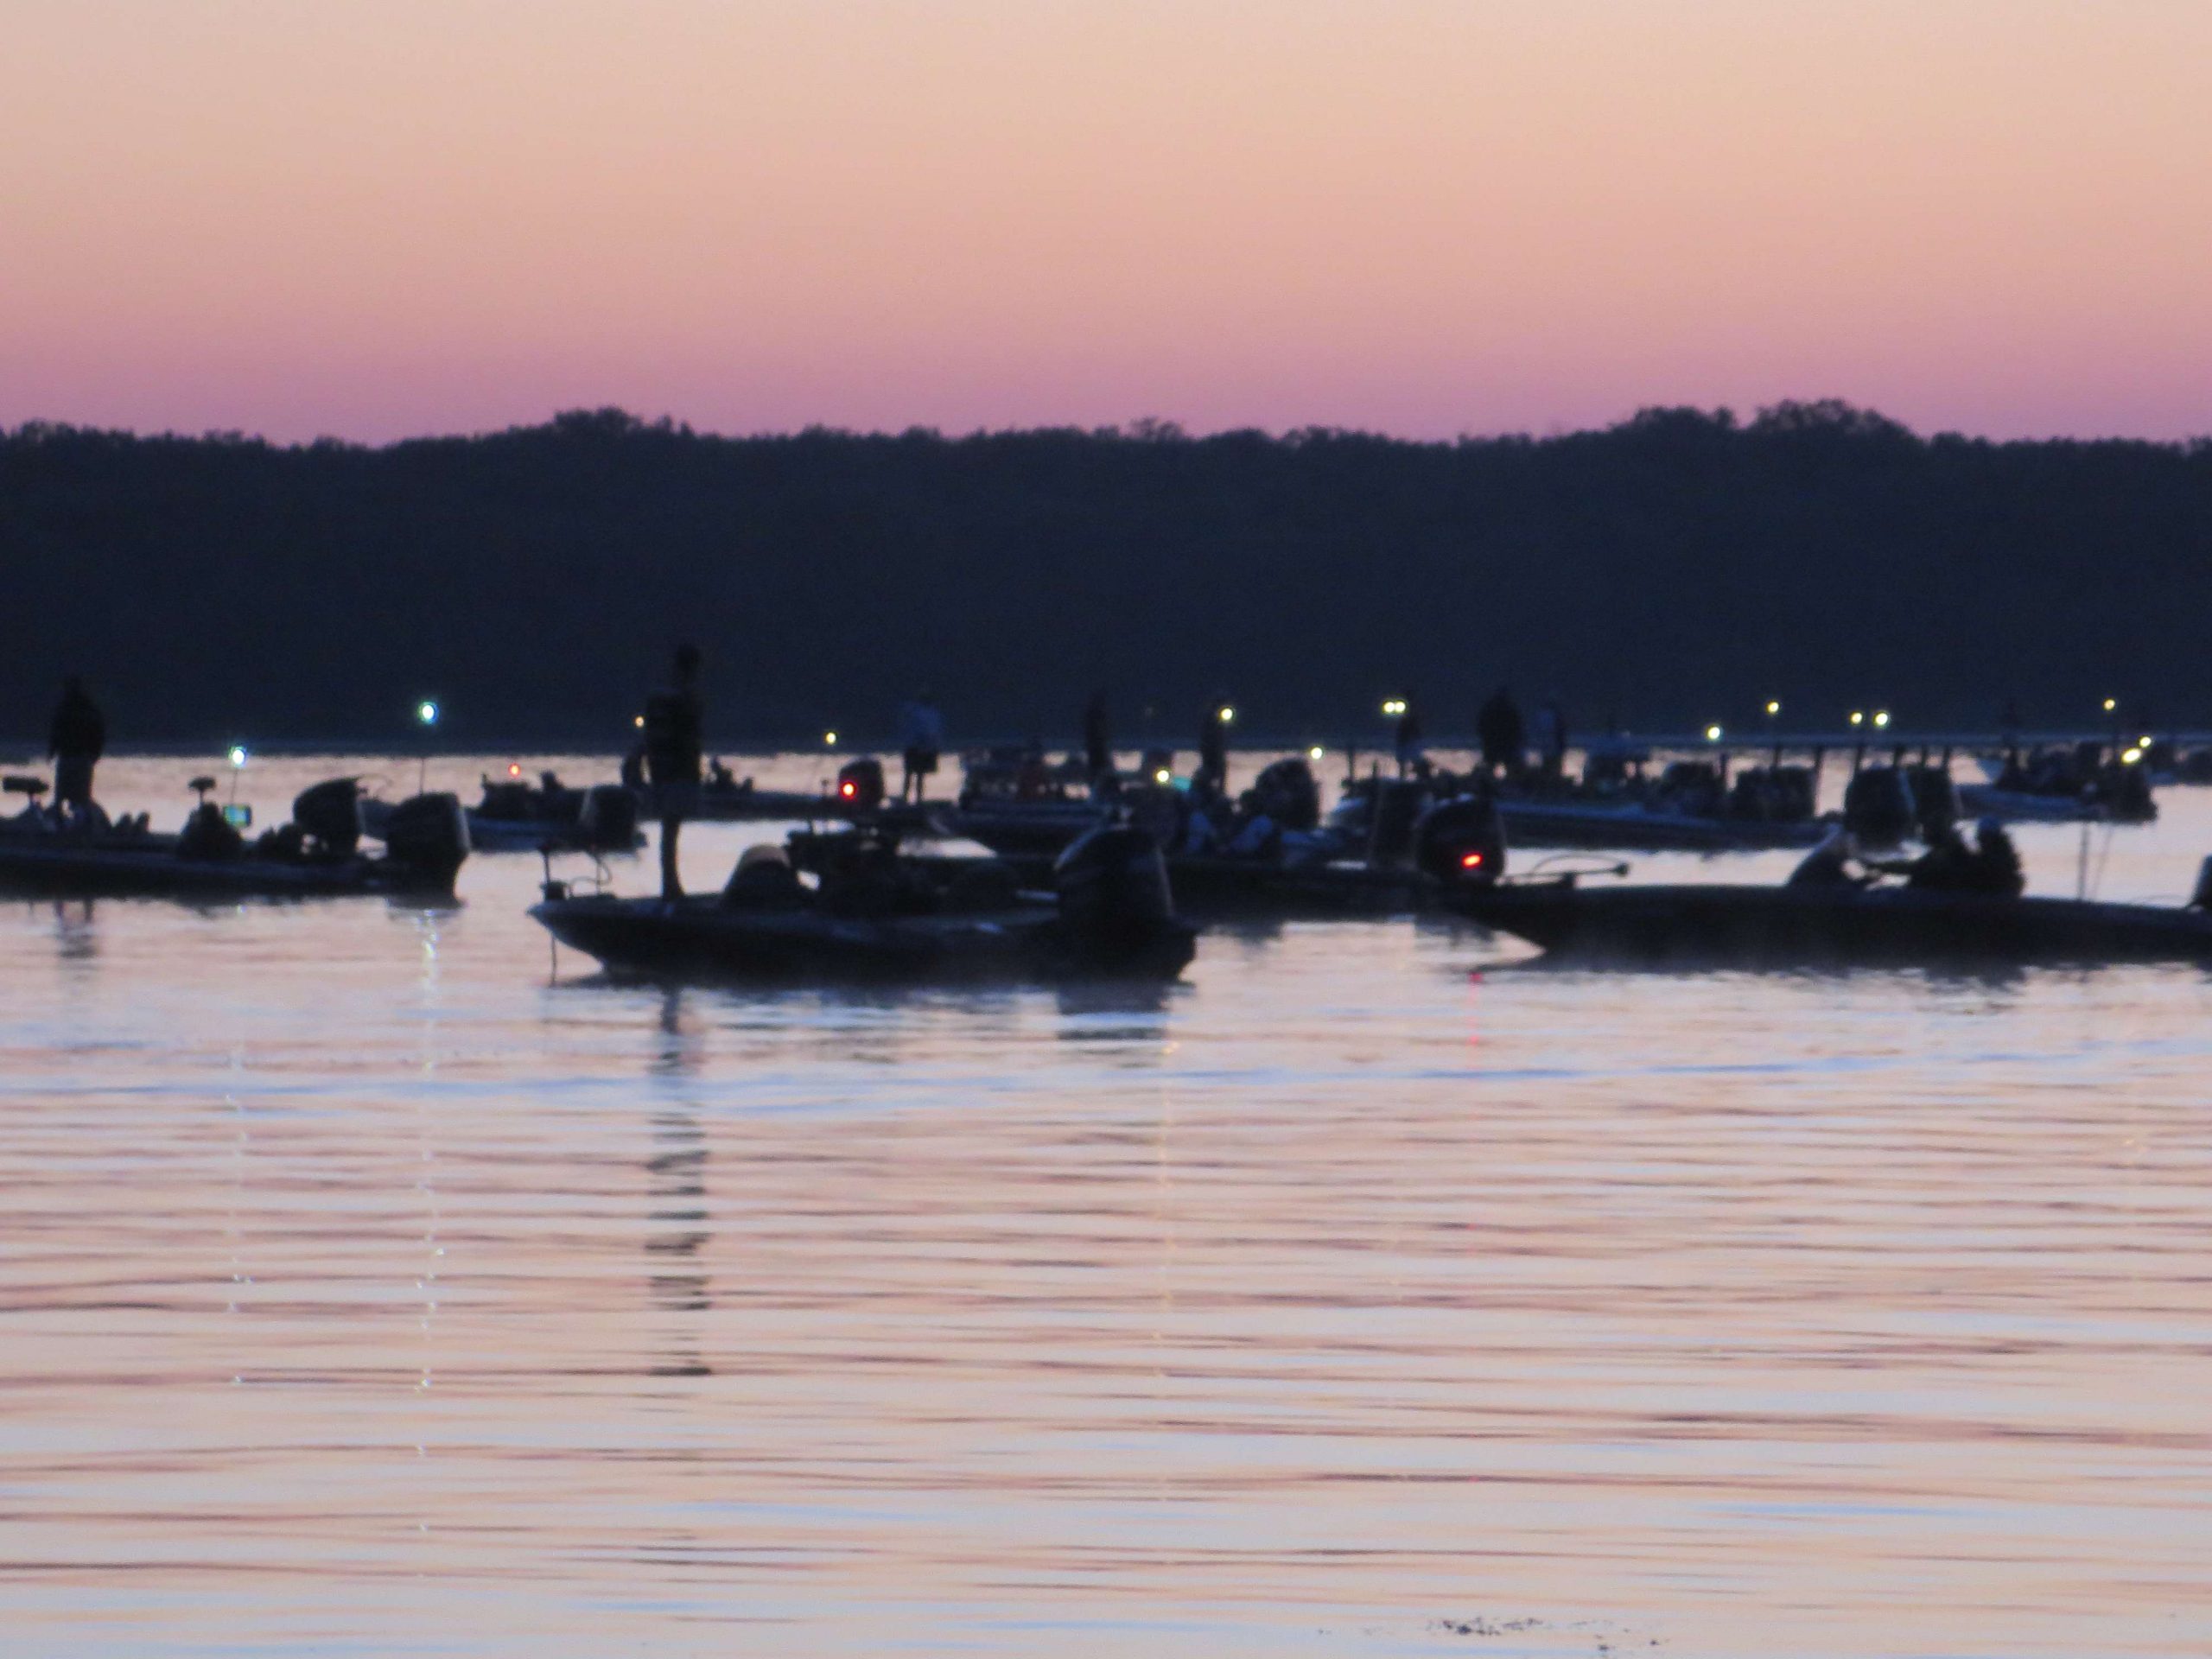 As 6 a.m. nears, the boats in the first flight move to the front of the pack. 